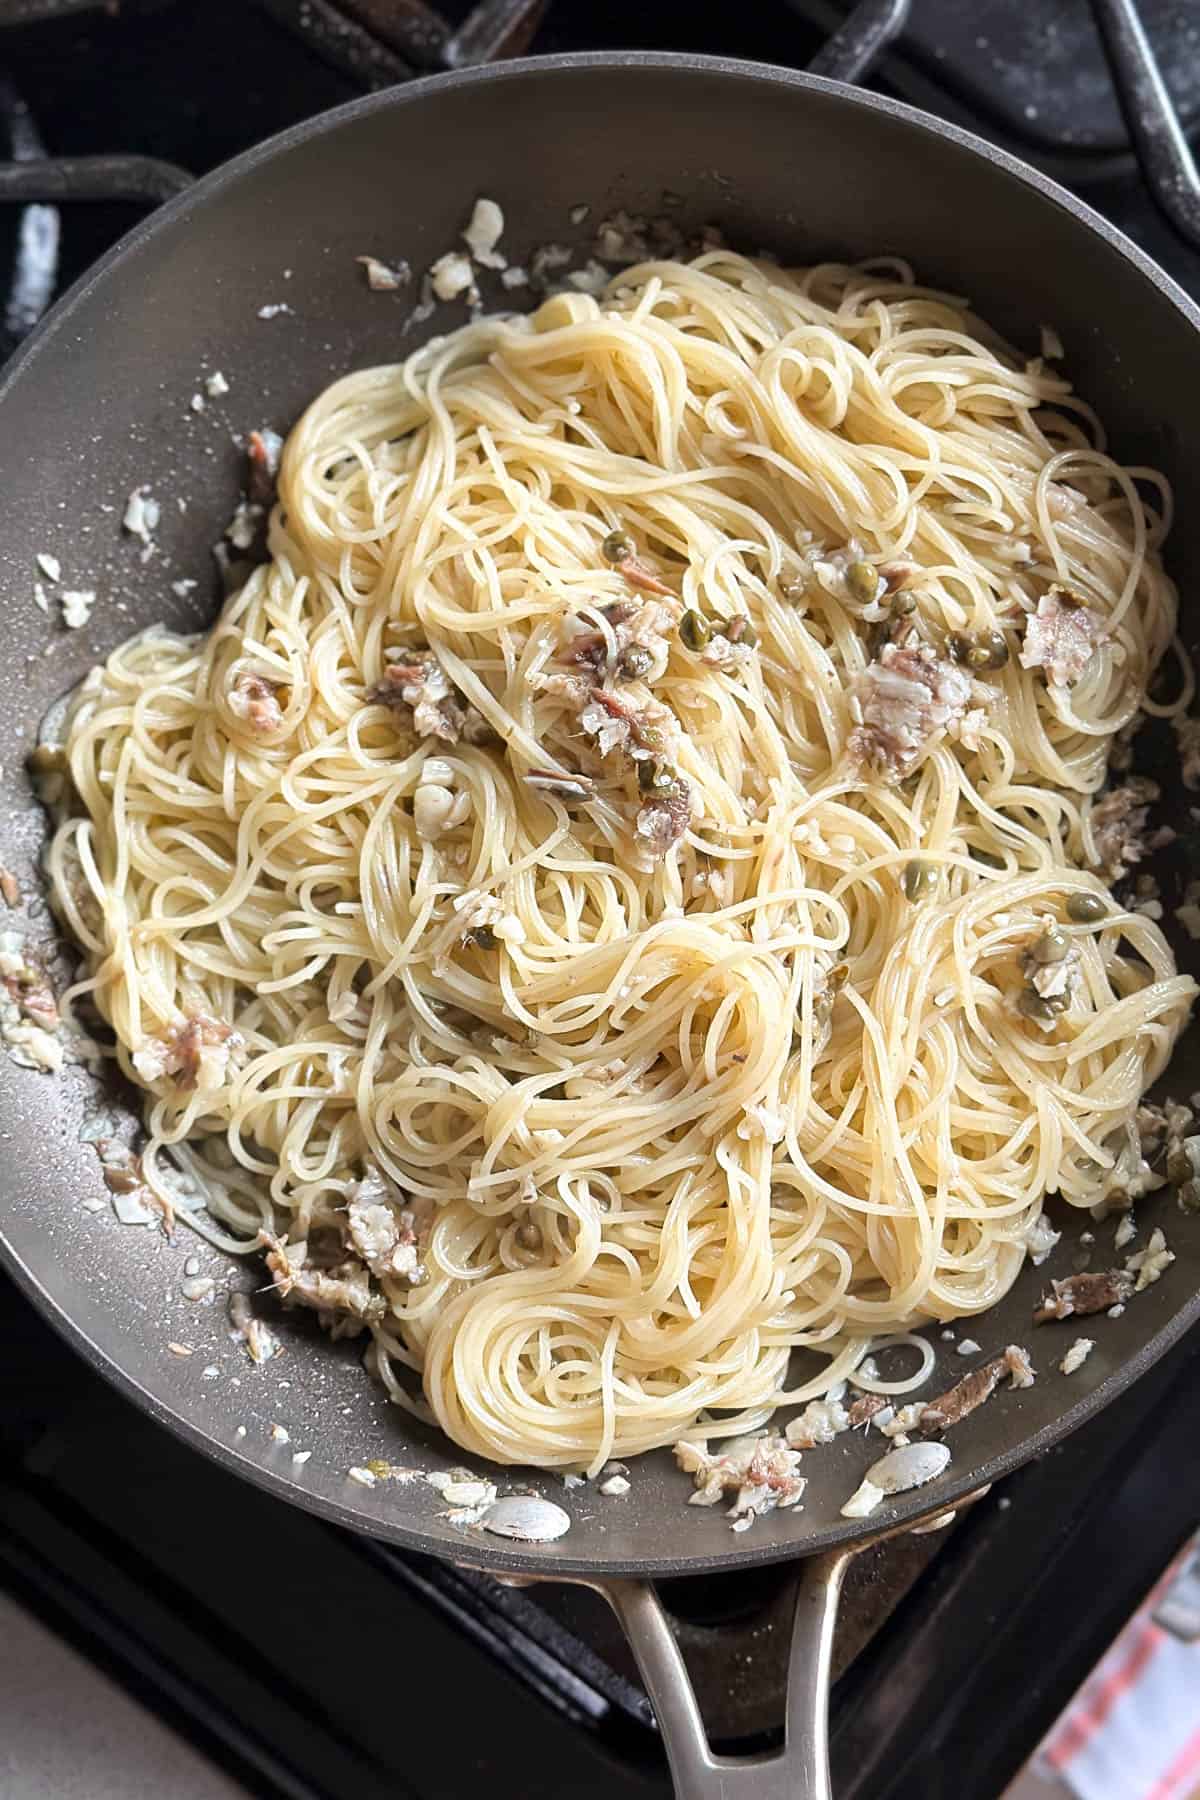 Mixing together angel hair pasta with anchovies, garlic, and capers in a pan.